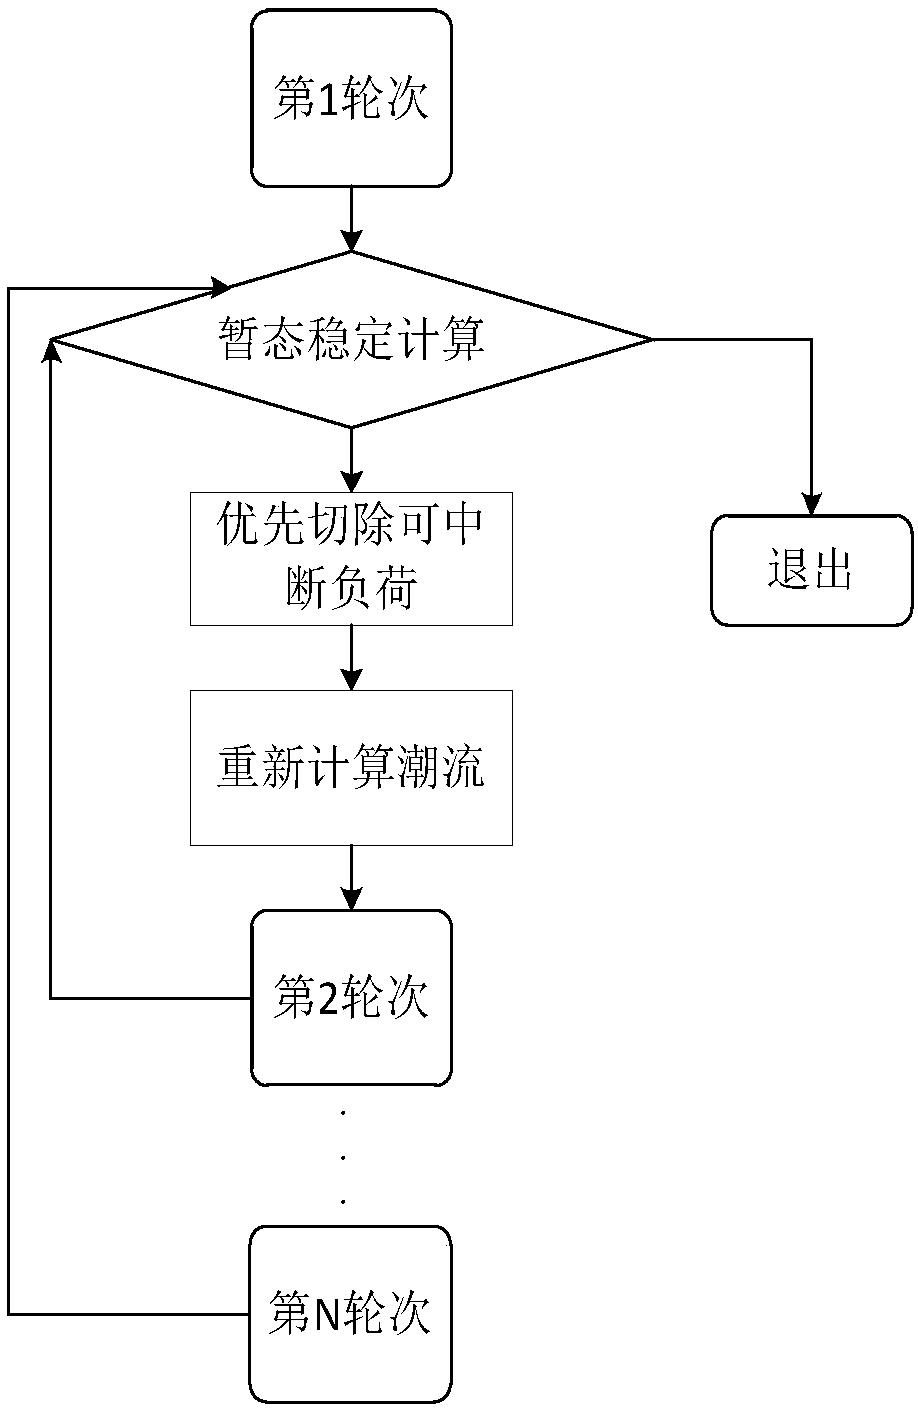 Multi-round low-frequency load reduction simulation calculation method and system for power grid